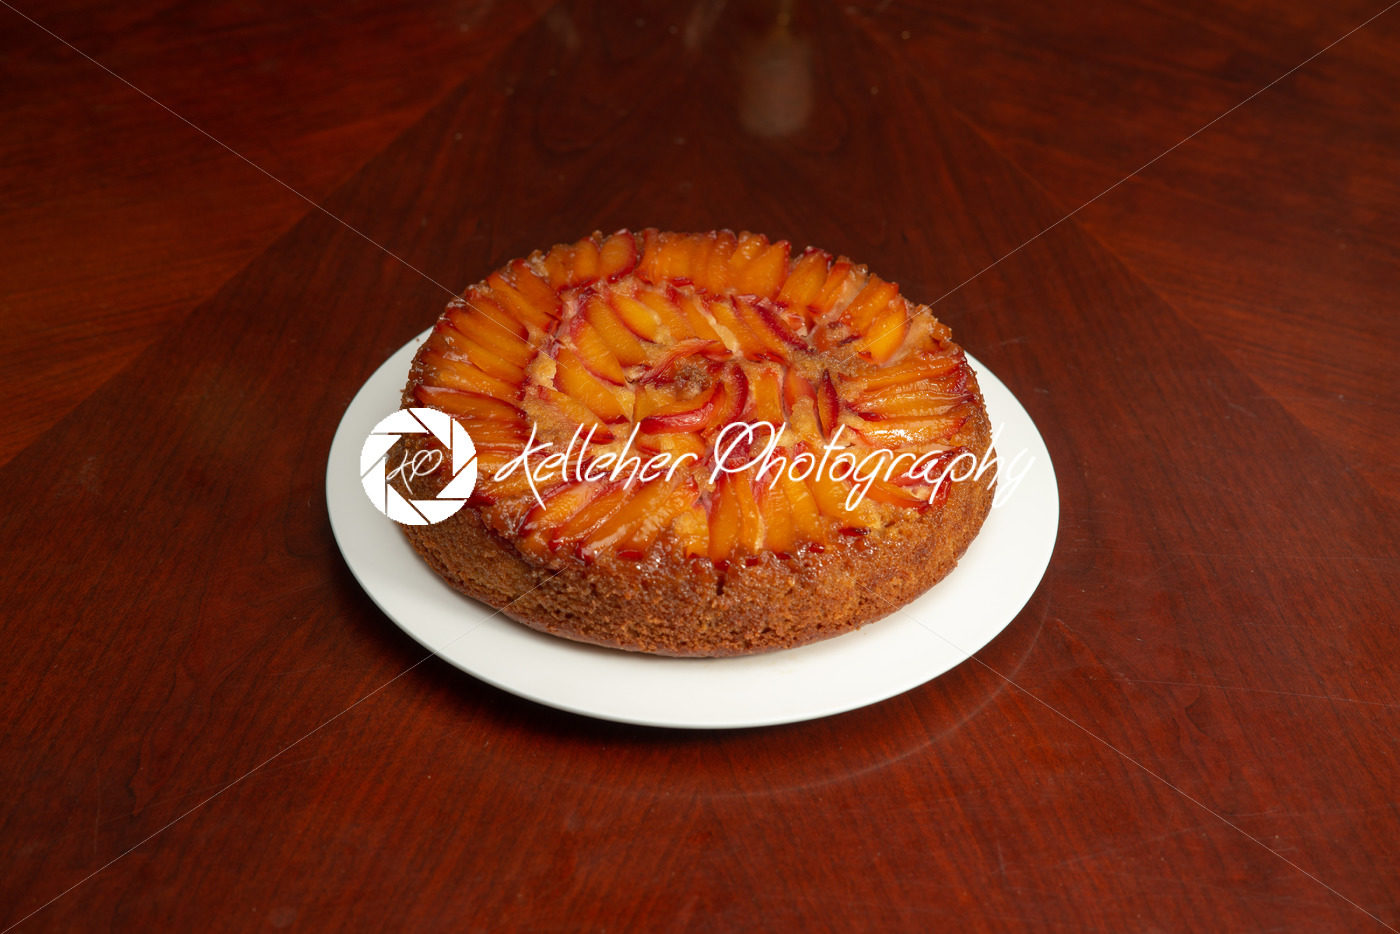 Cake with nectarines on white plate on top of dining table - Kelleher Photography Store